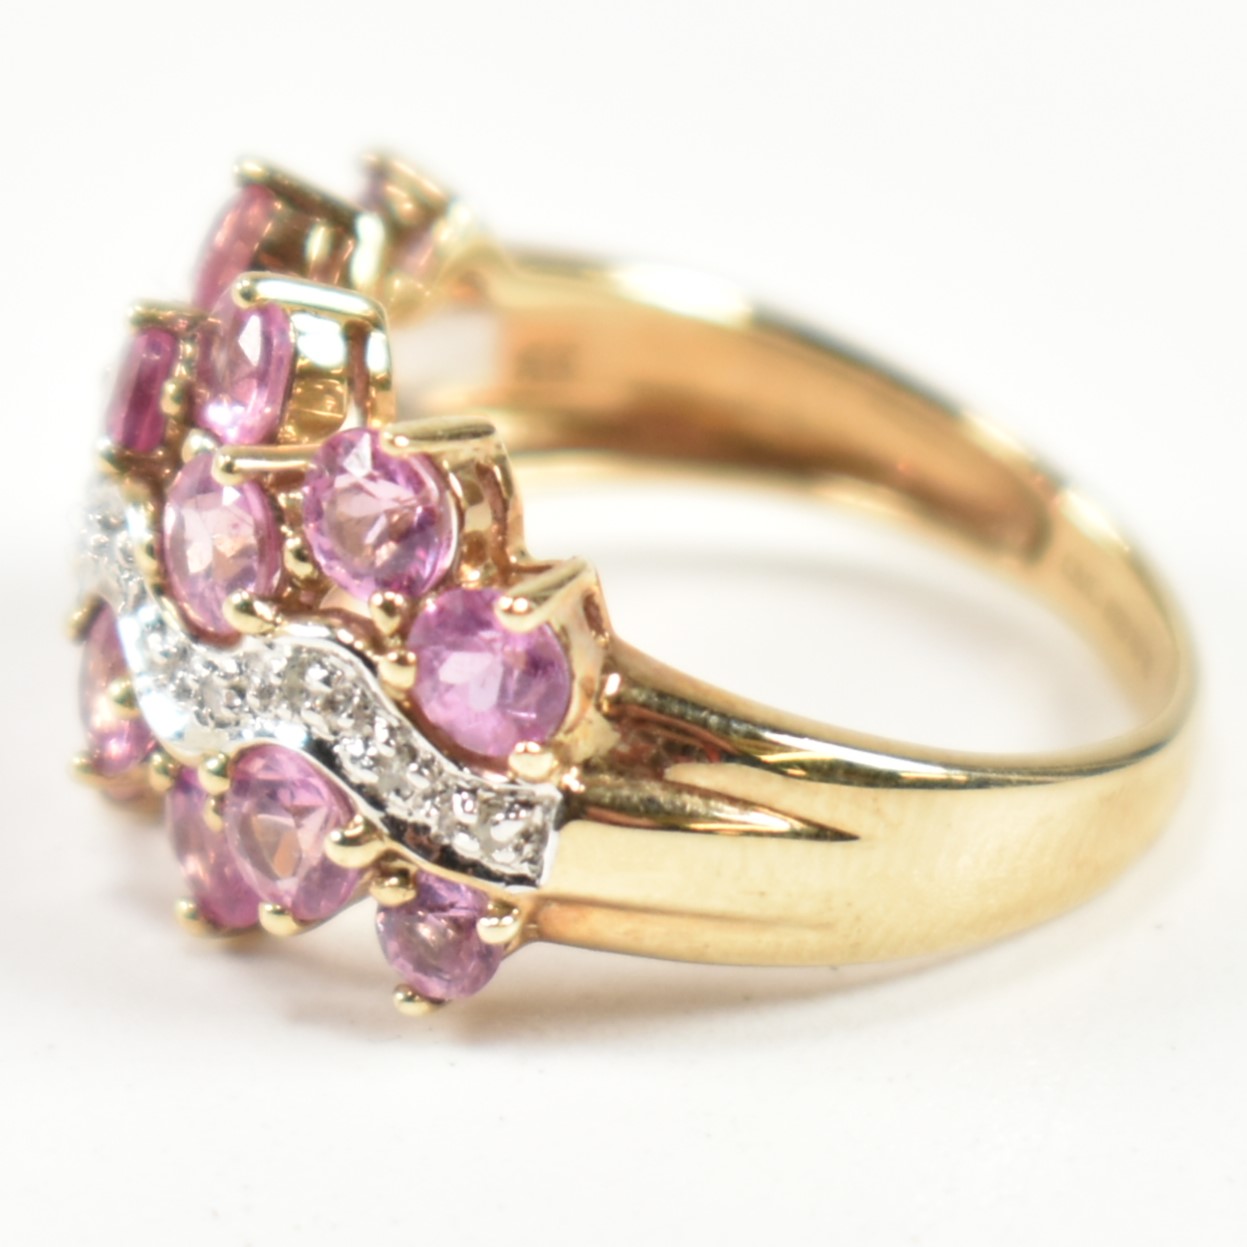 HALLMARKED 9CT GOLD PINK SAPPHIRE & DIAMOND CLUSTER RING - Image 6 of 9